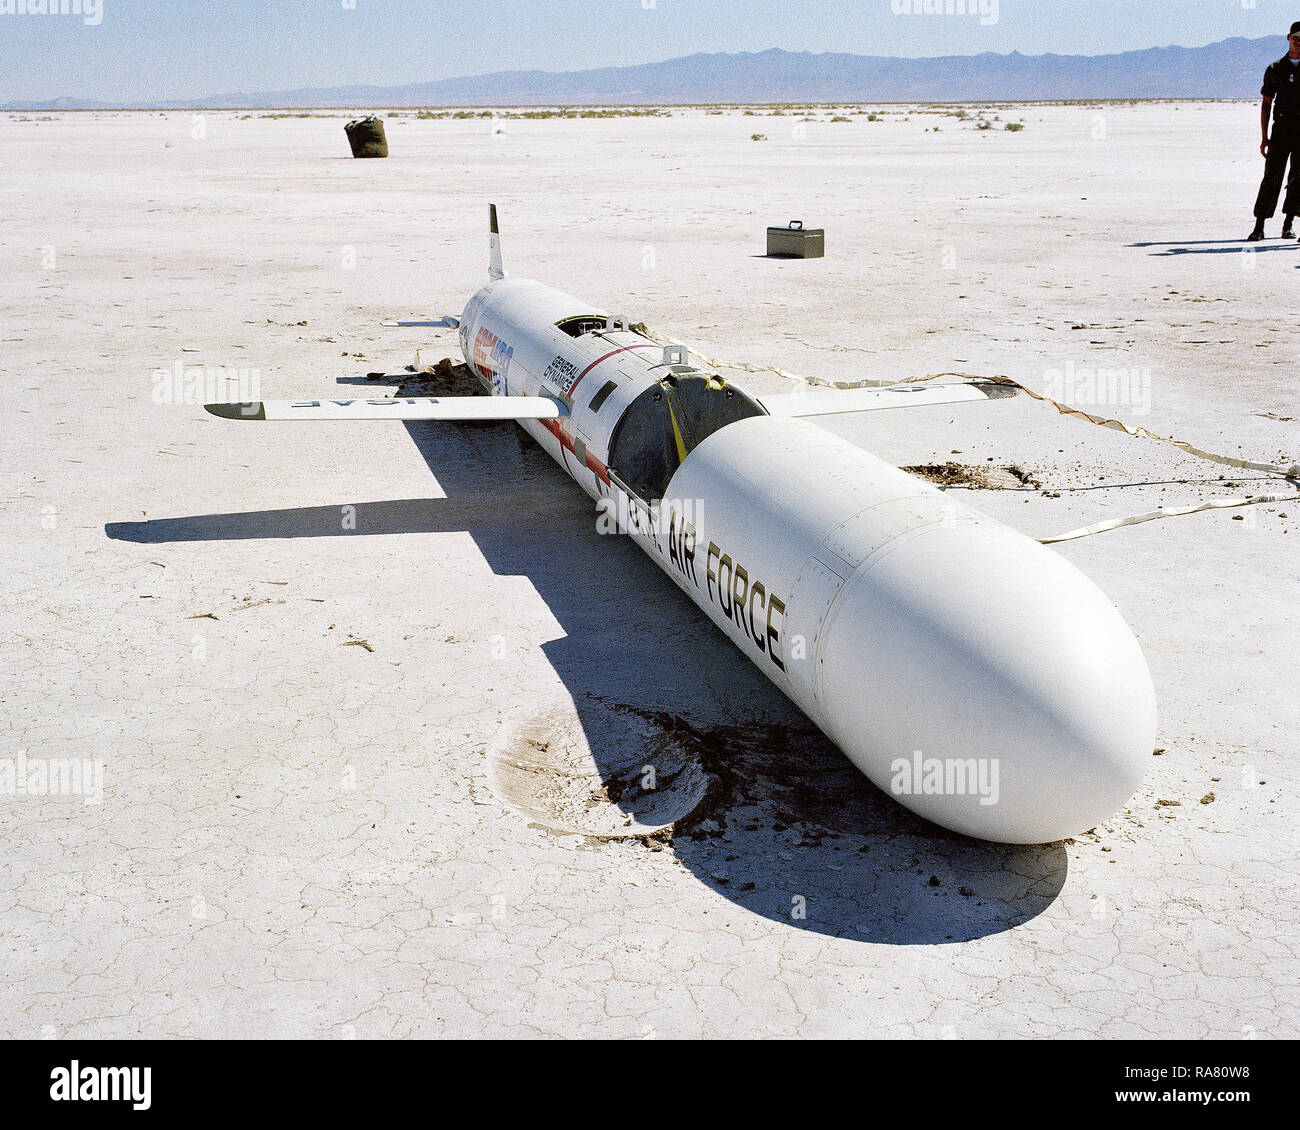 1979 - A close-up view of an AGM-109 Tomahawk air-launched cruise missile on the ground after impact. Stock Photo